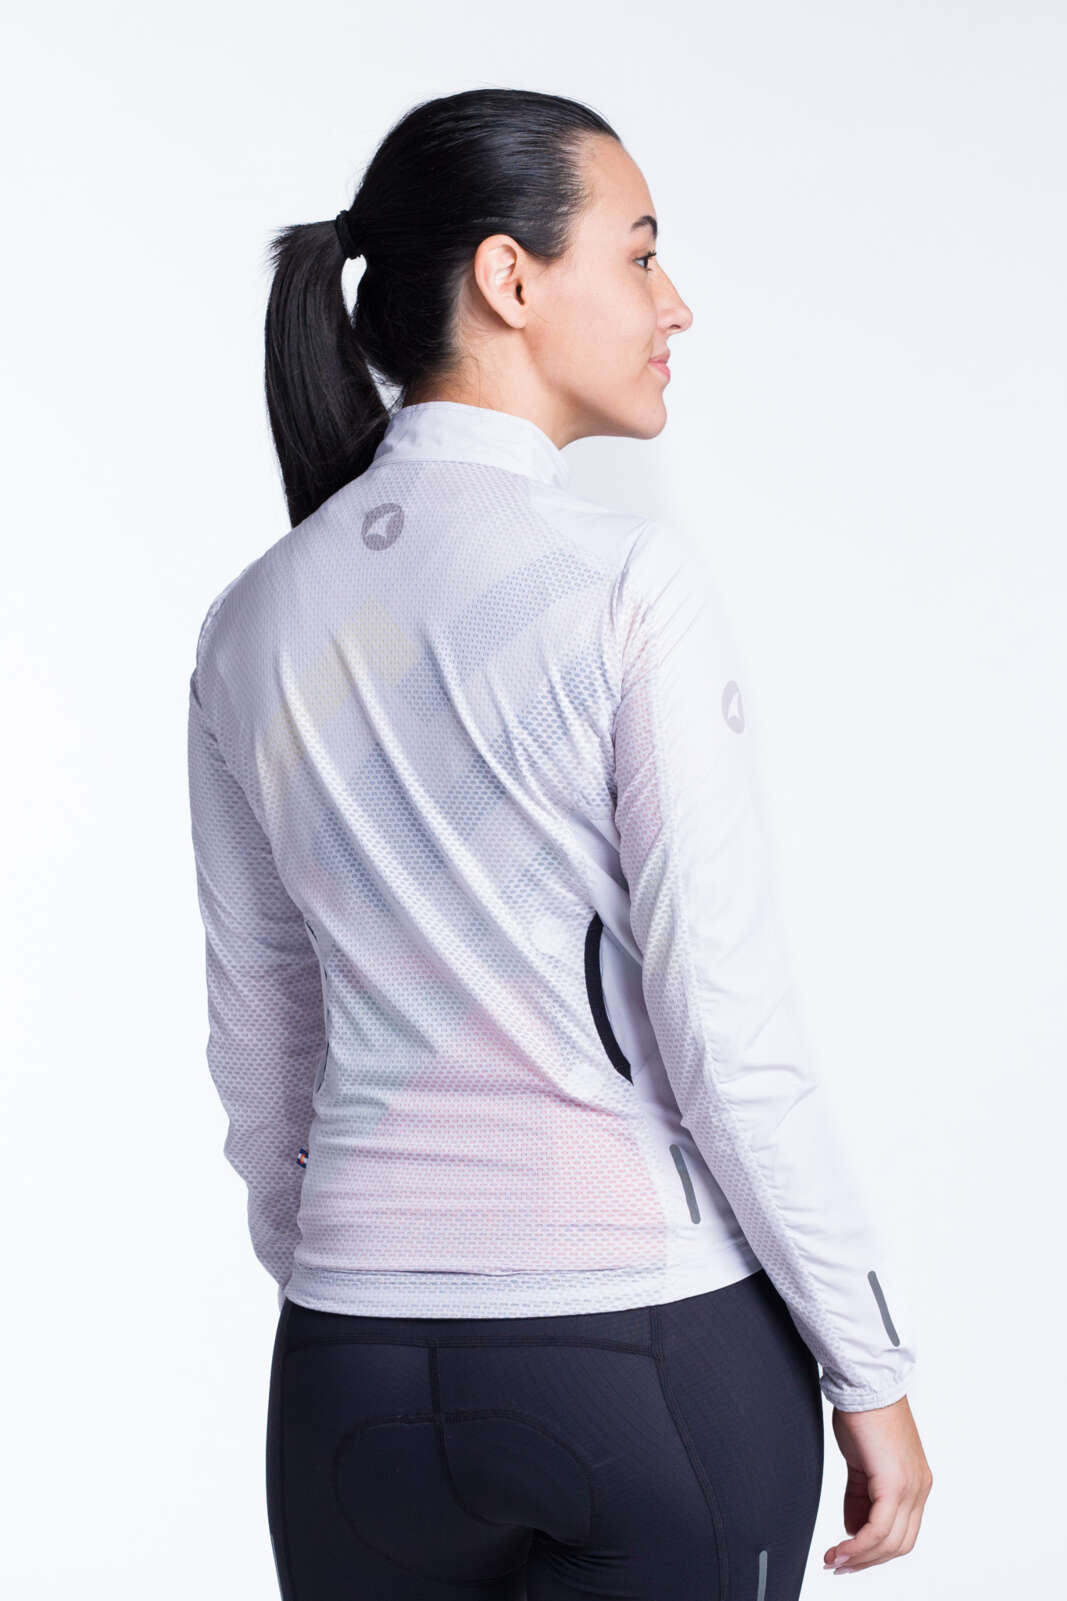 Women's White Packable Cycling Wind Jacket - Back View